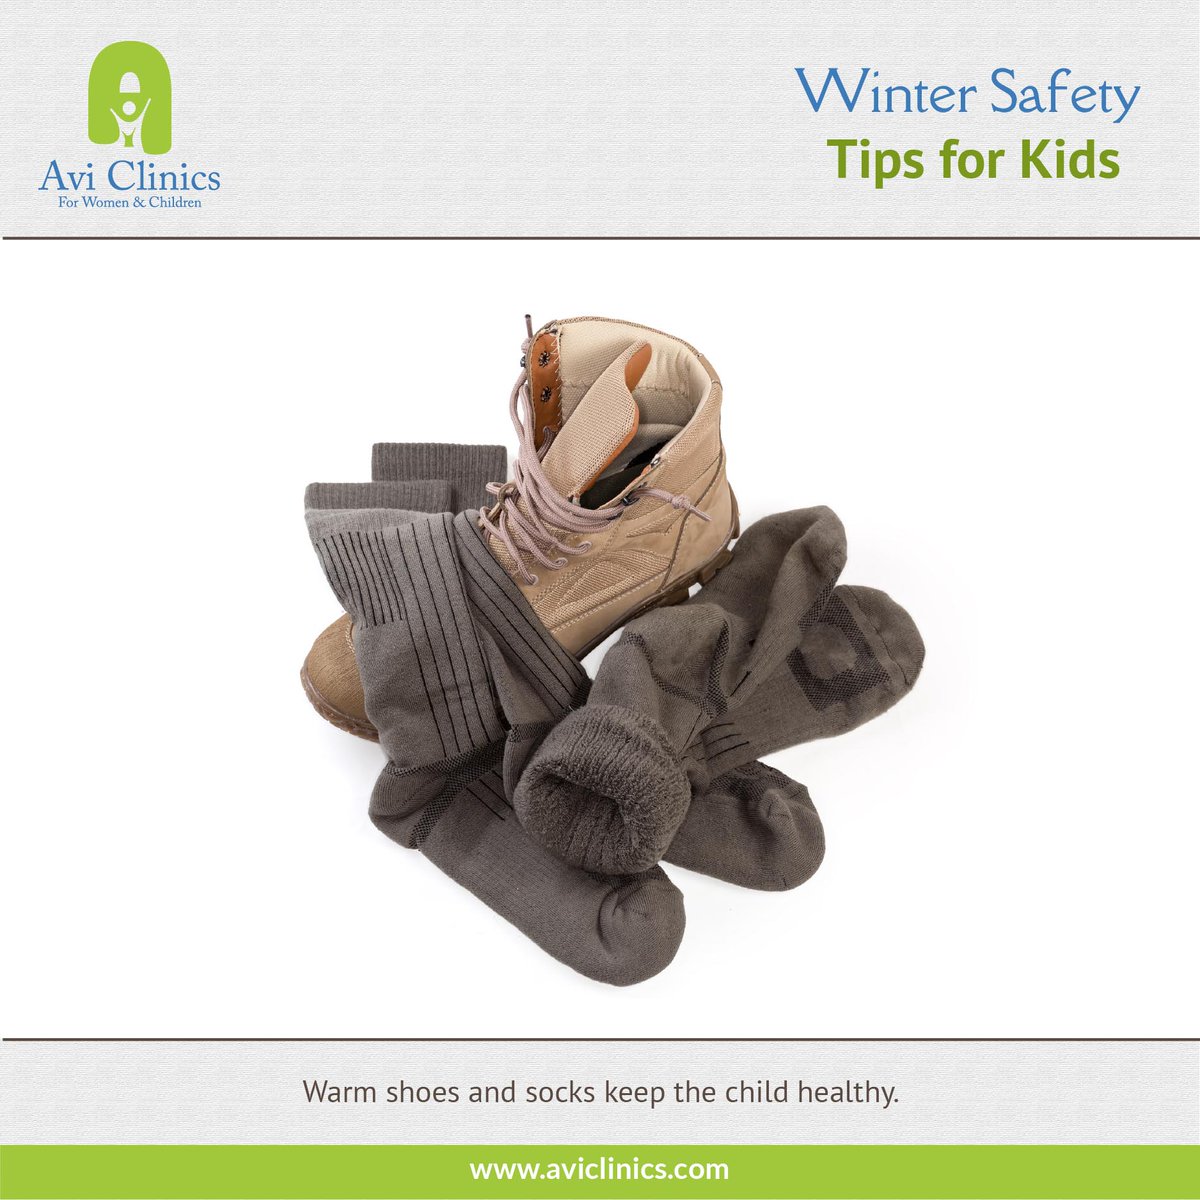 Winter Safety Tips for Kids.

Warm shoes and socks keep the child healthy.

#Weather #WeatherSafety #WeatherSafetyTips #TipsForKids #WinterTips